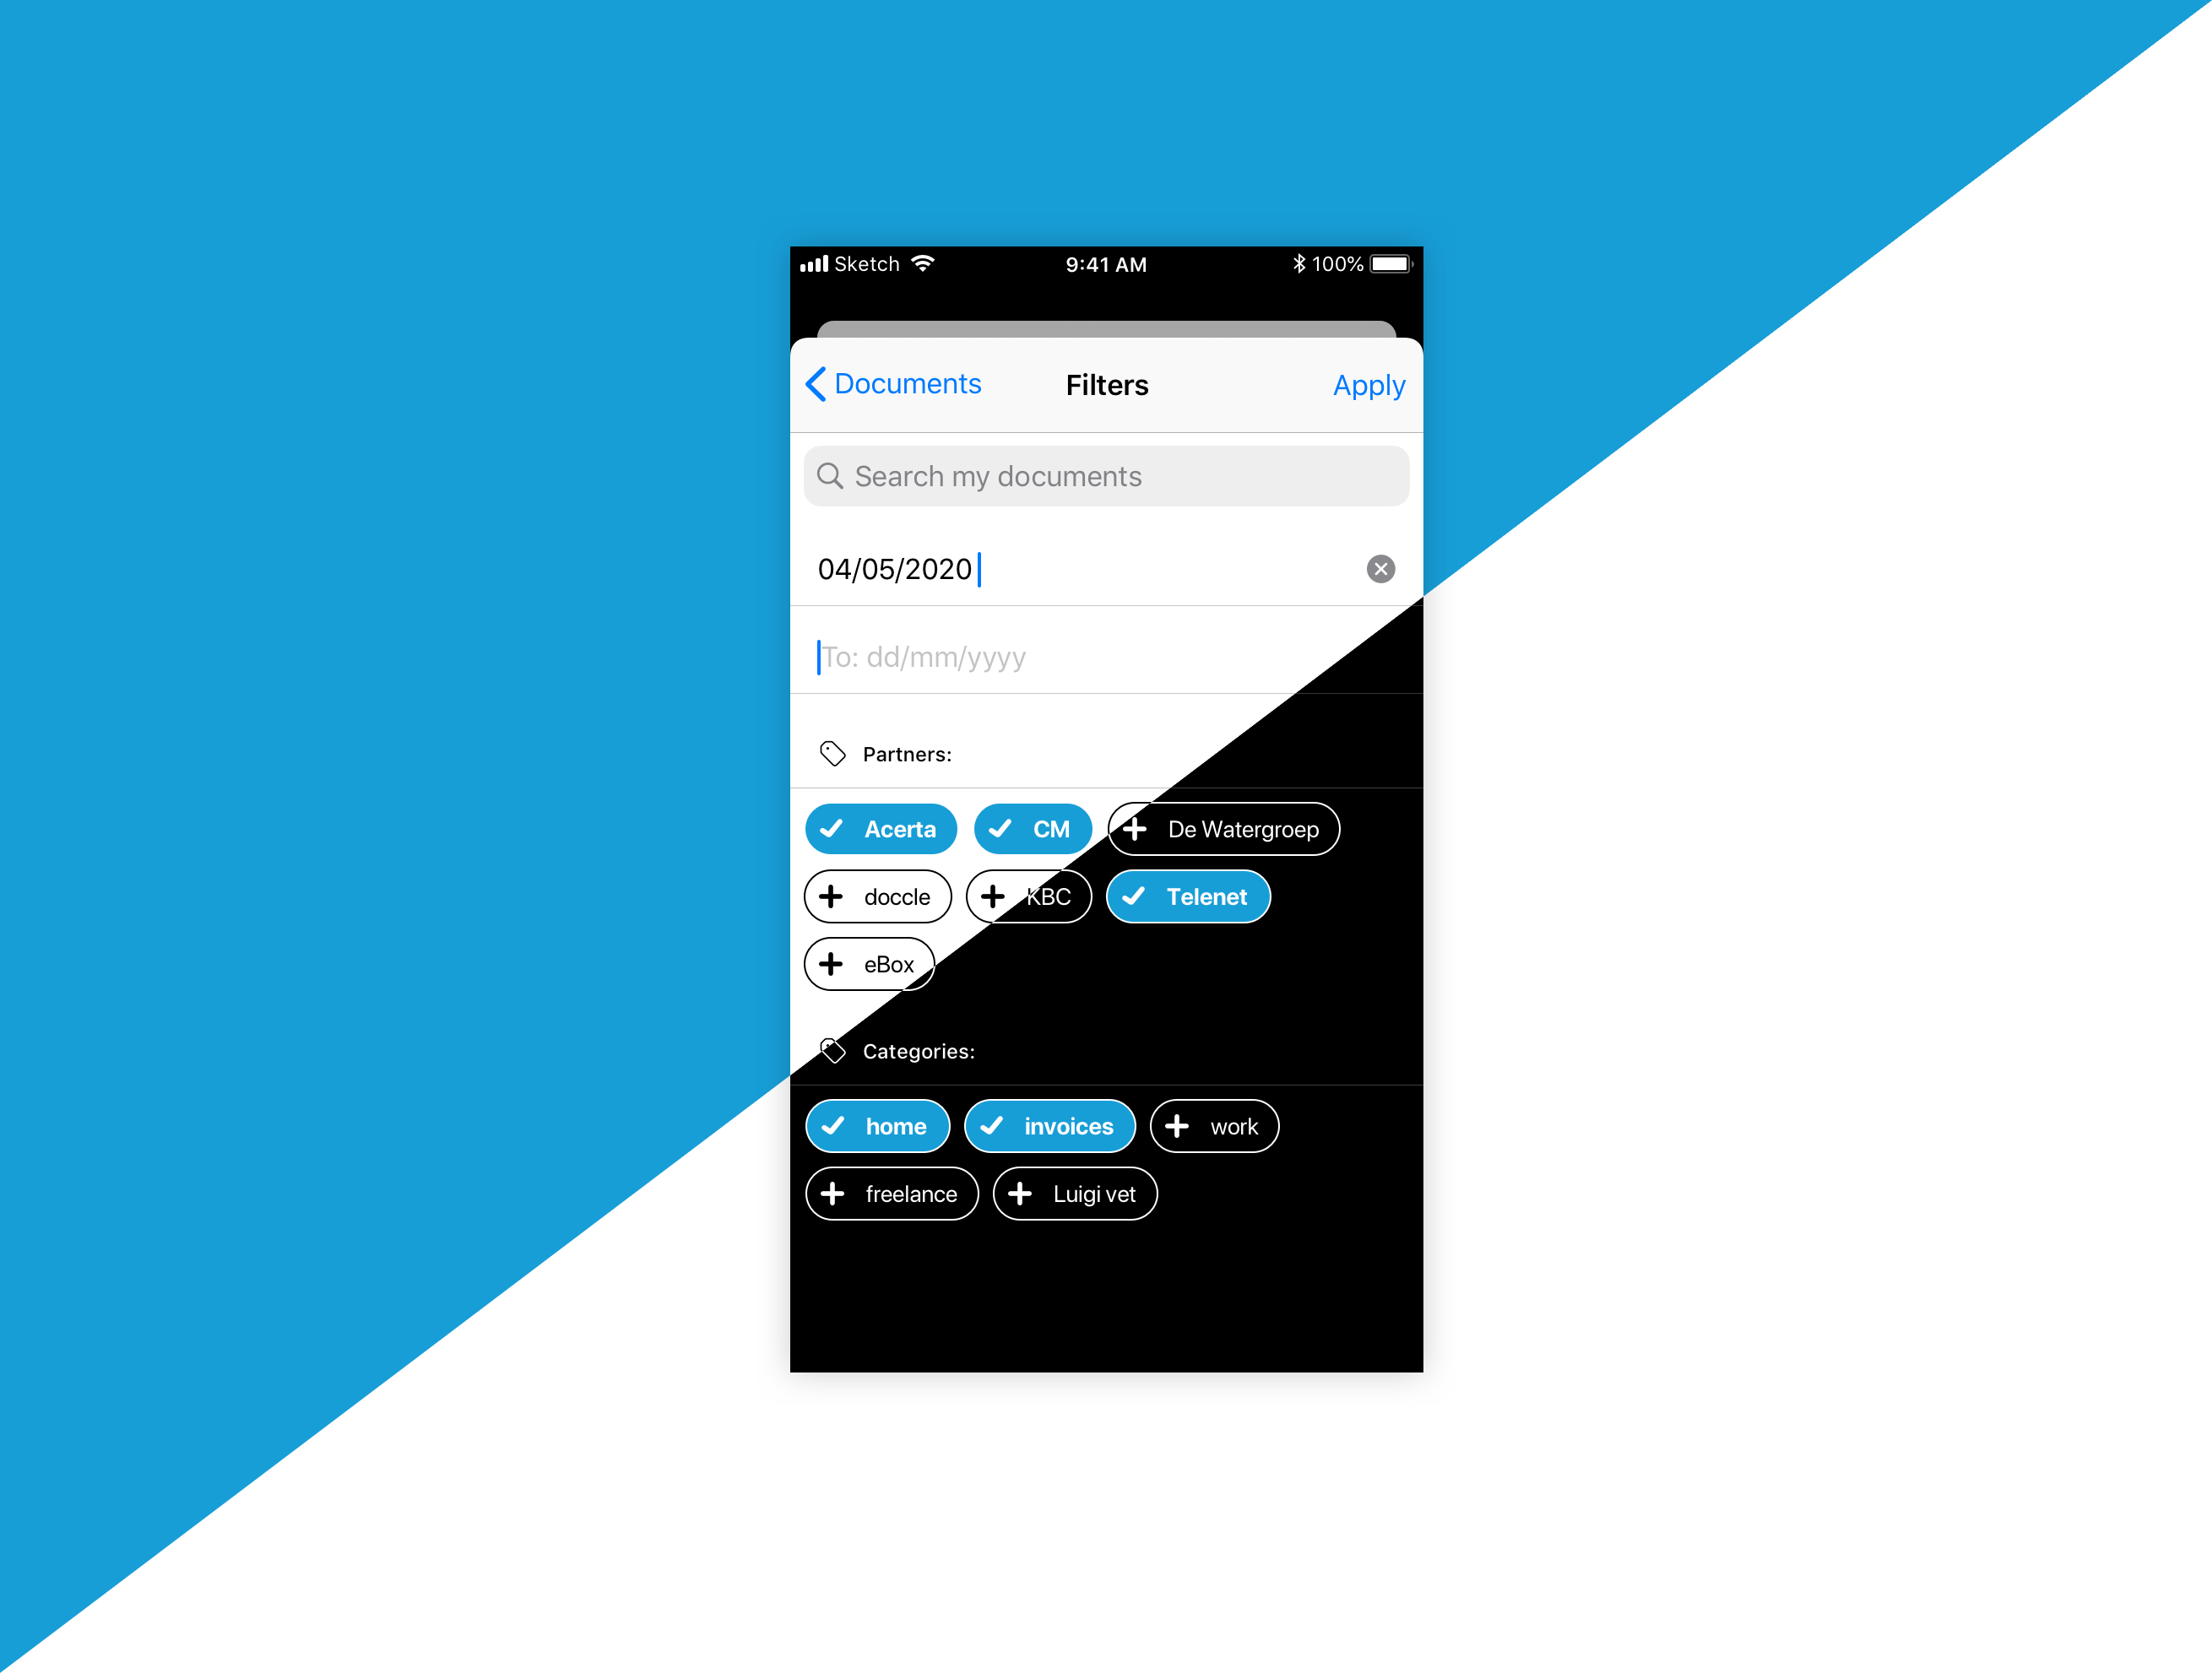 example of the Filters screen with the new design, both for light and dark mode. The image is a rectangle with the screen in the middle. There is a right to left diagonal cut. Left side has a blue background and shows the light version of the screen. The right side has a white background and shows the dark version of the Filters screen.